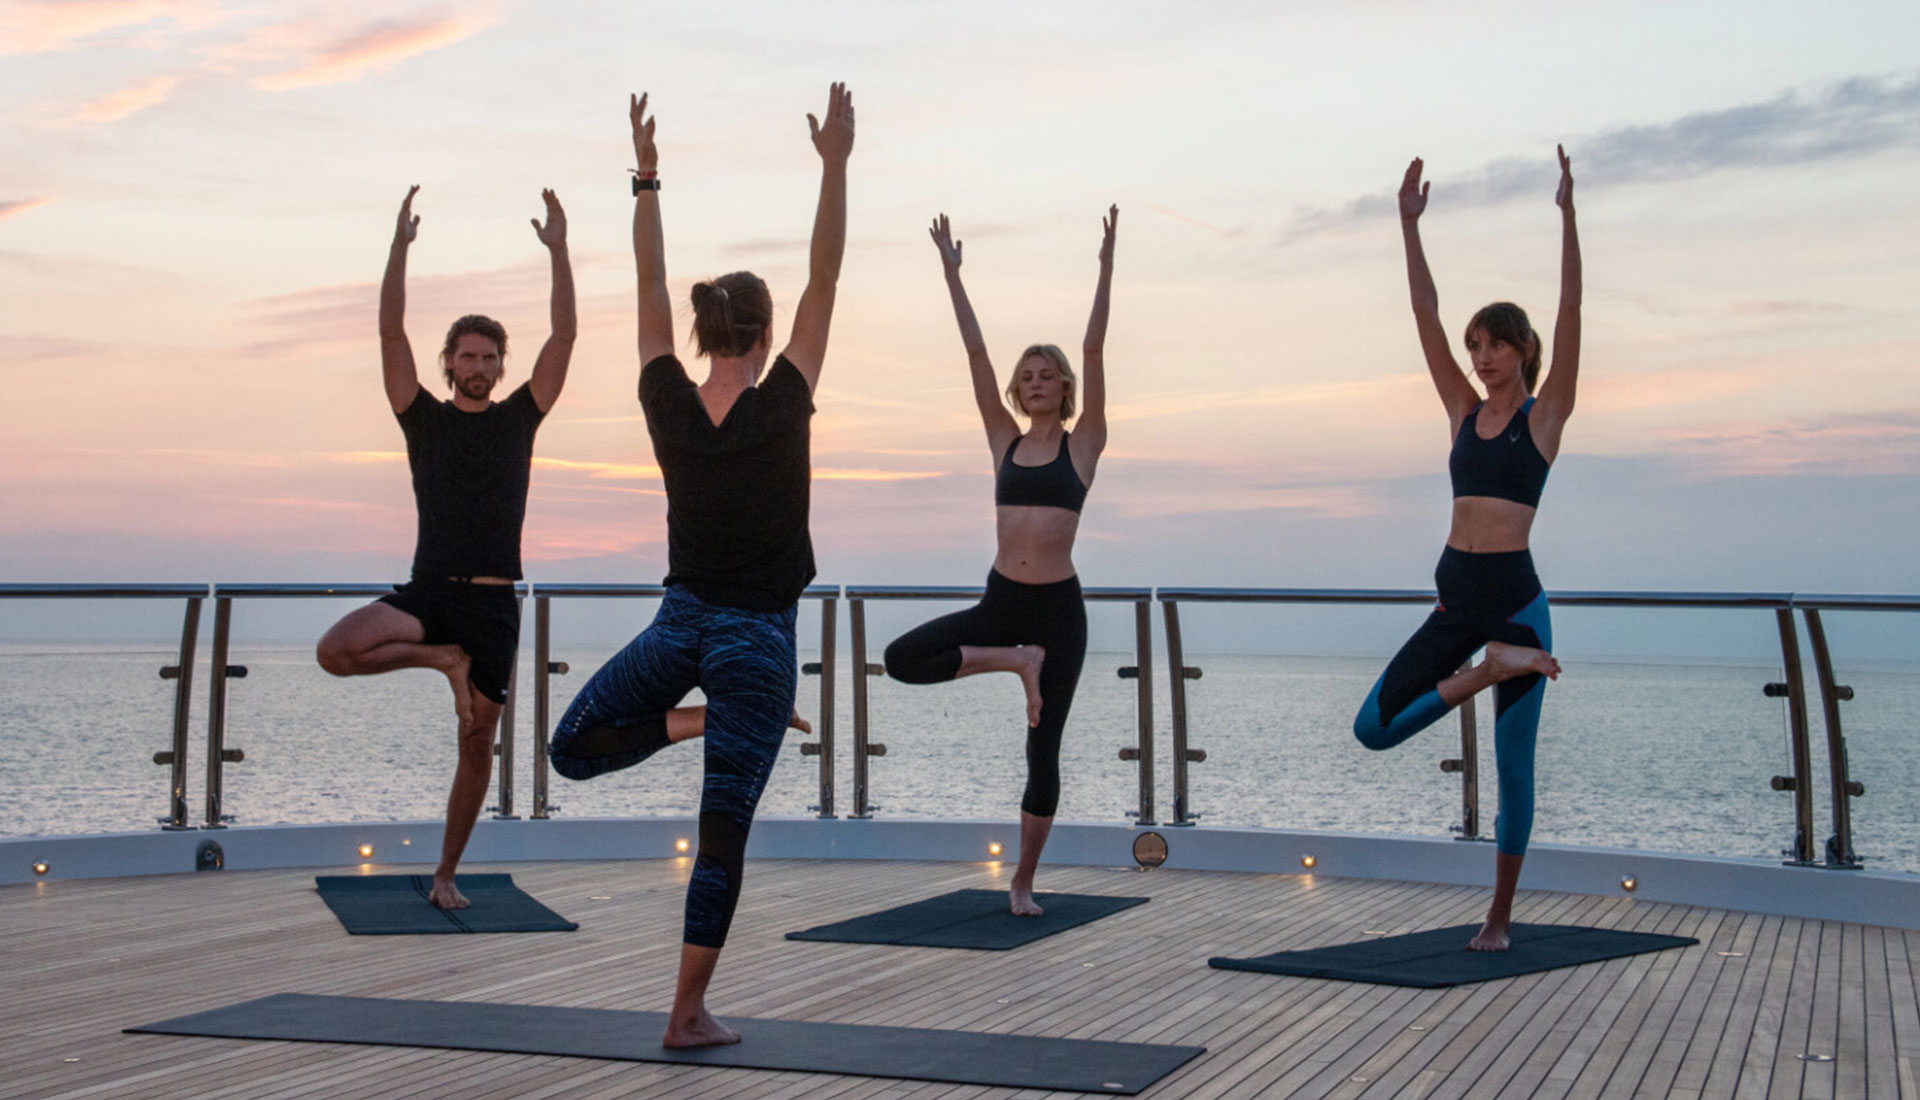 Make new year resolutions last beyond January with a wellness charter